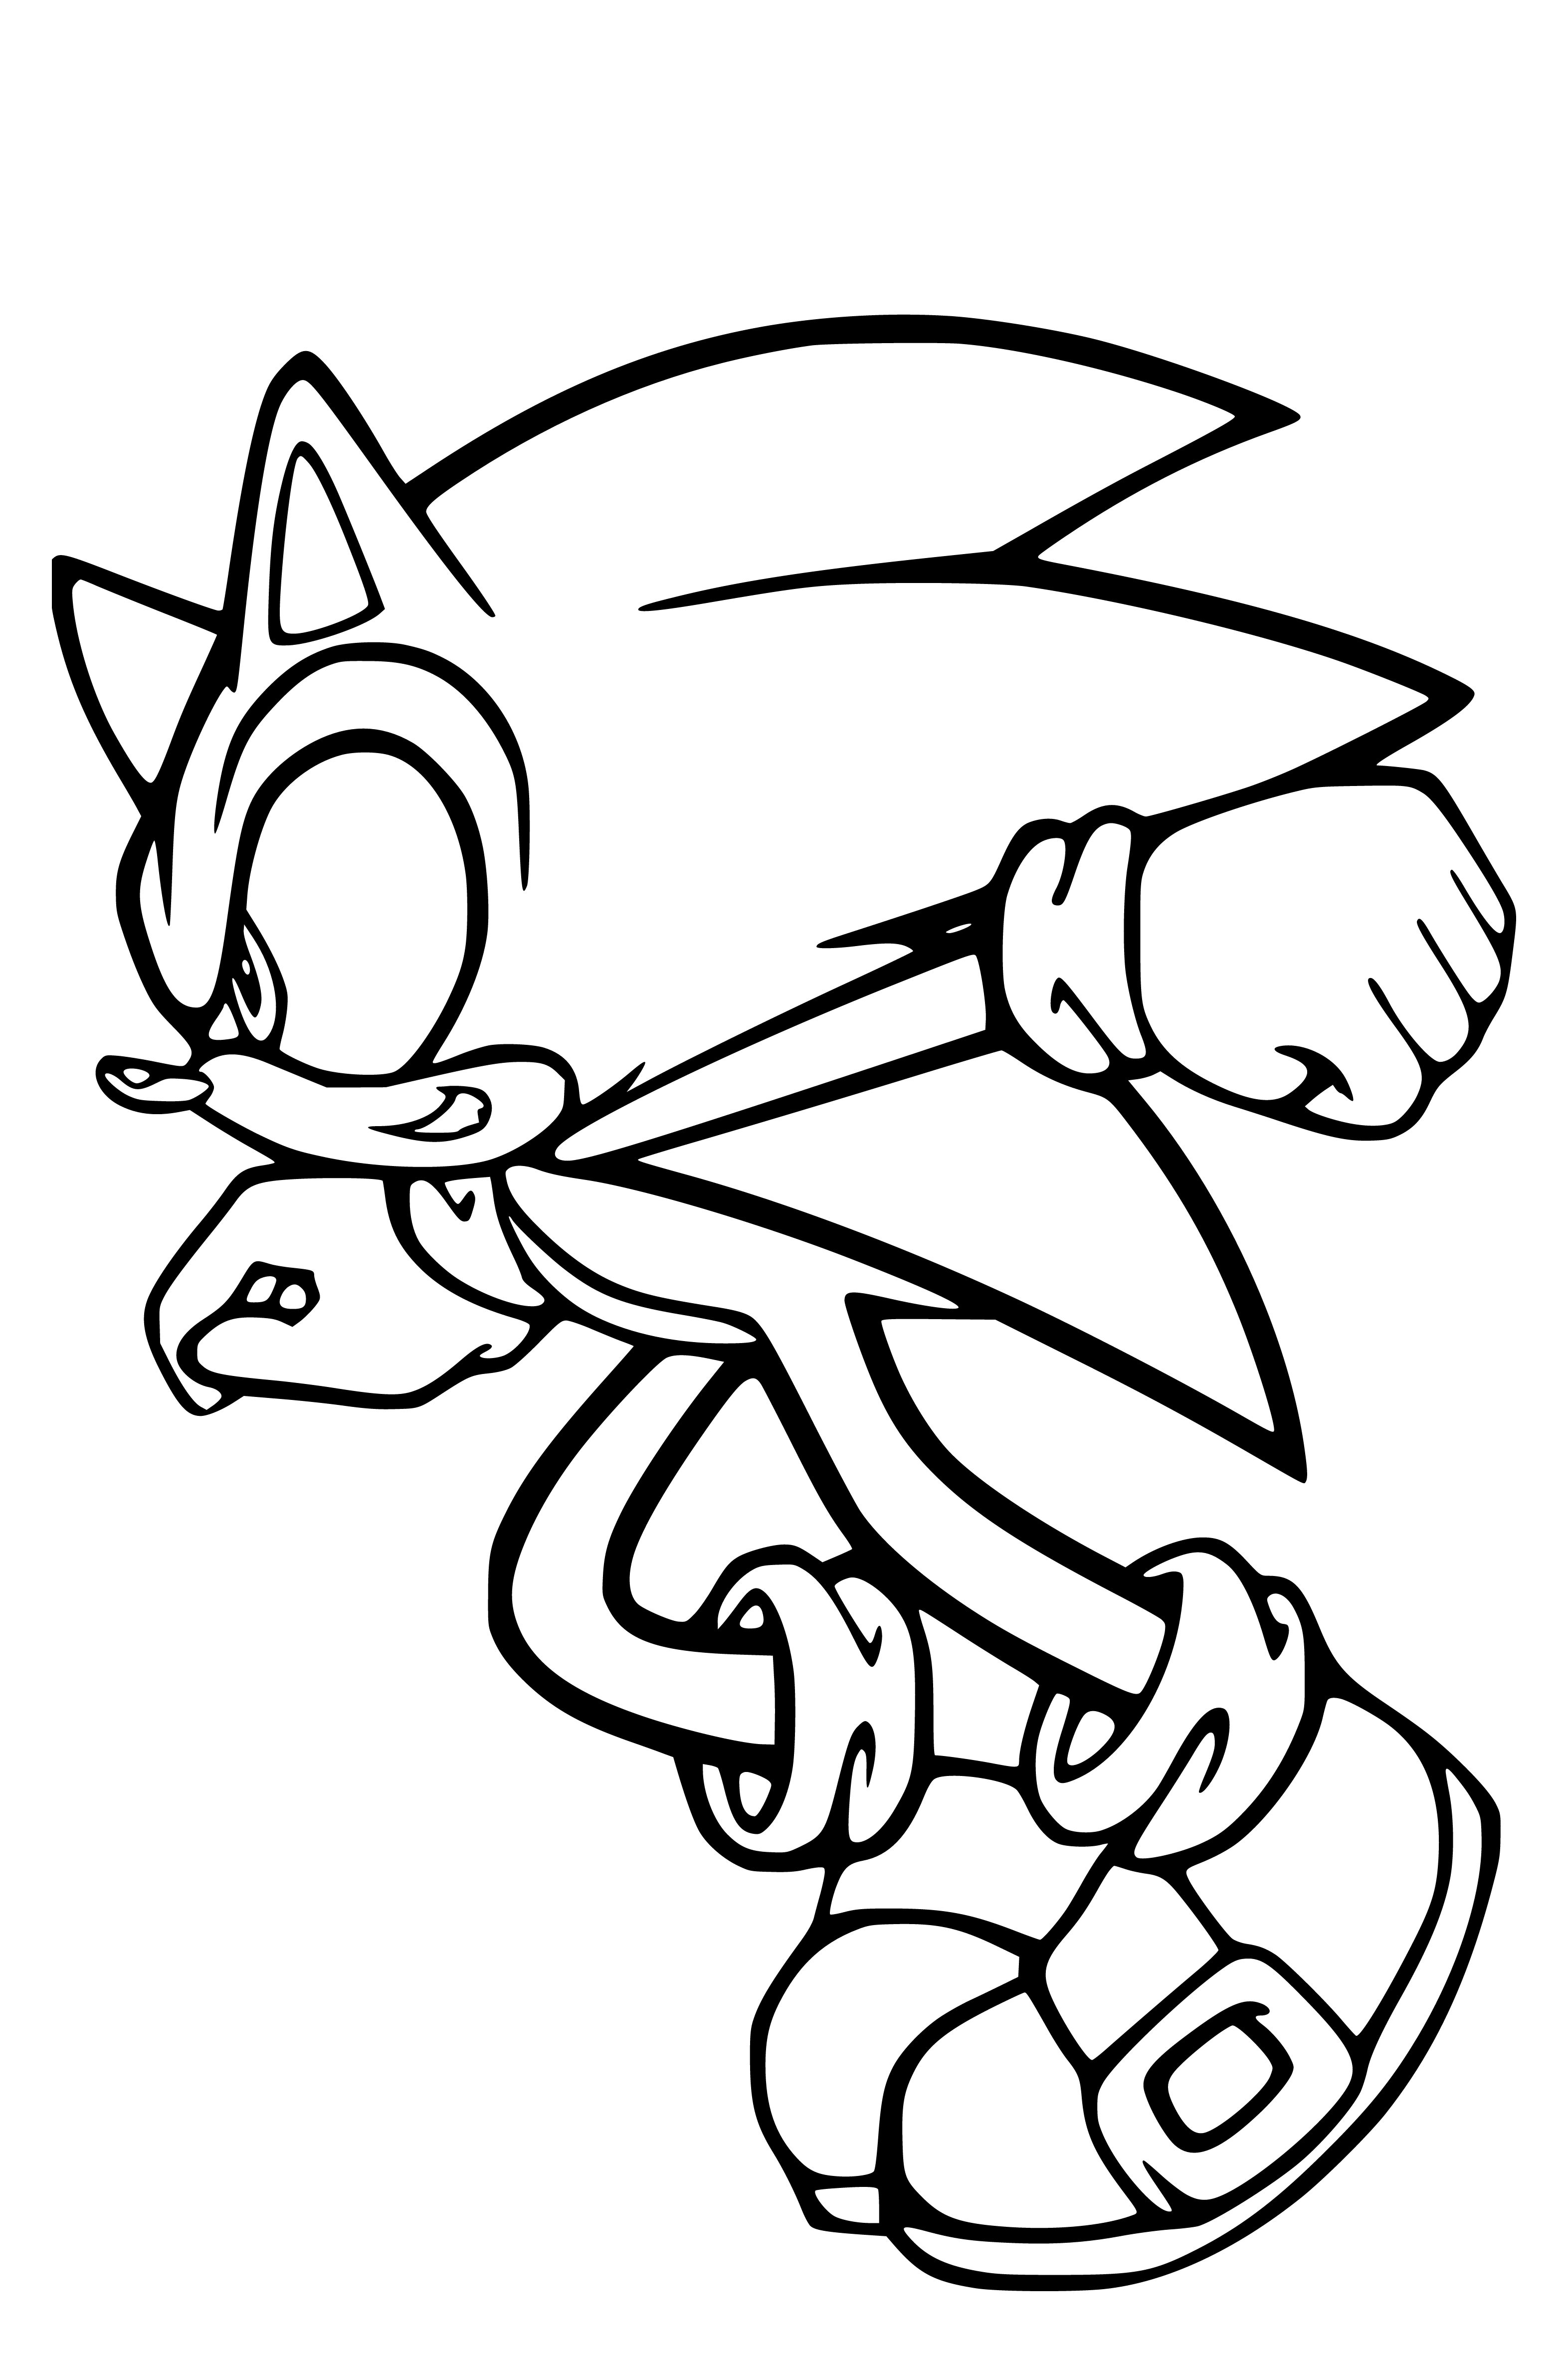 Sonic the Hedgehog Easy Coloring Page for Kids - SheetalColor.com